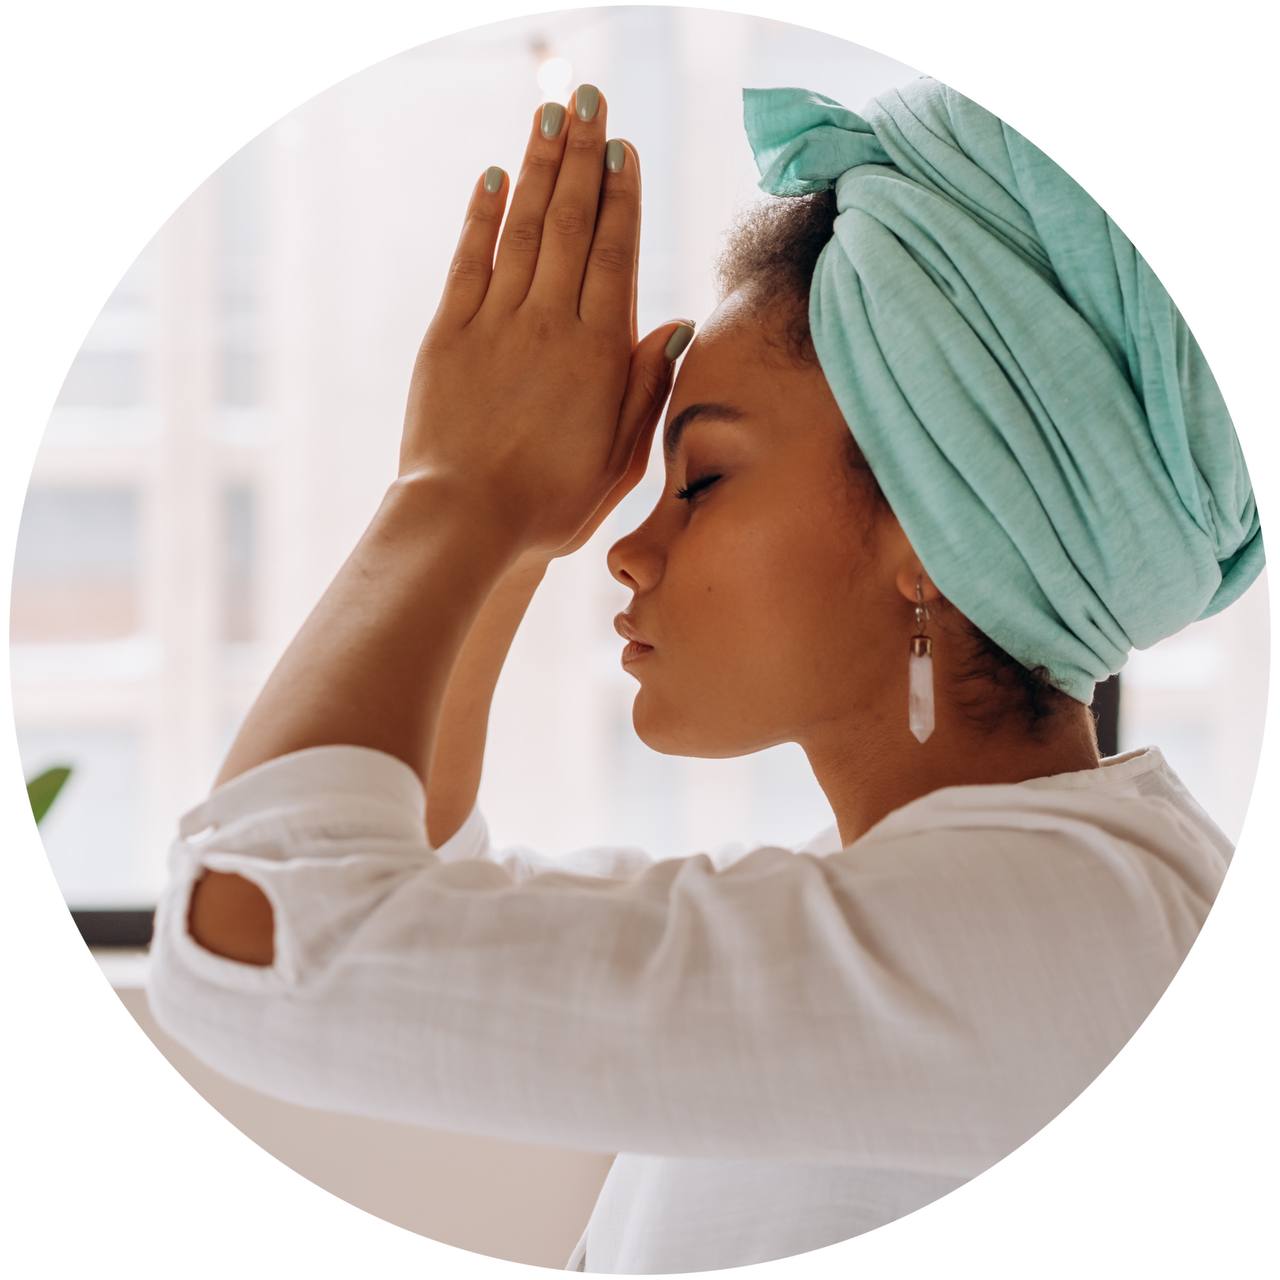 Woman with her hands in prayer position at her third eye chakra